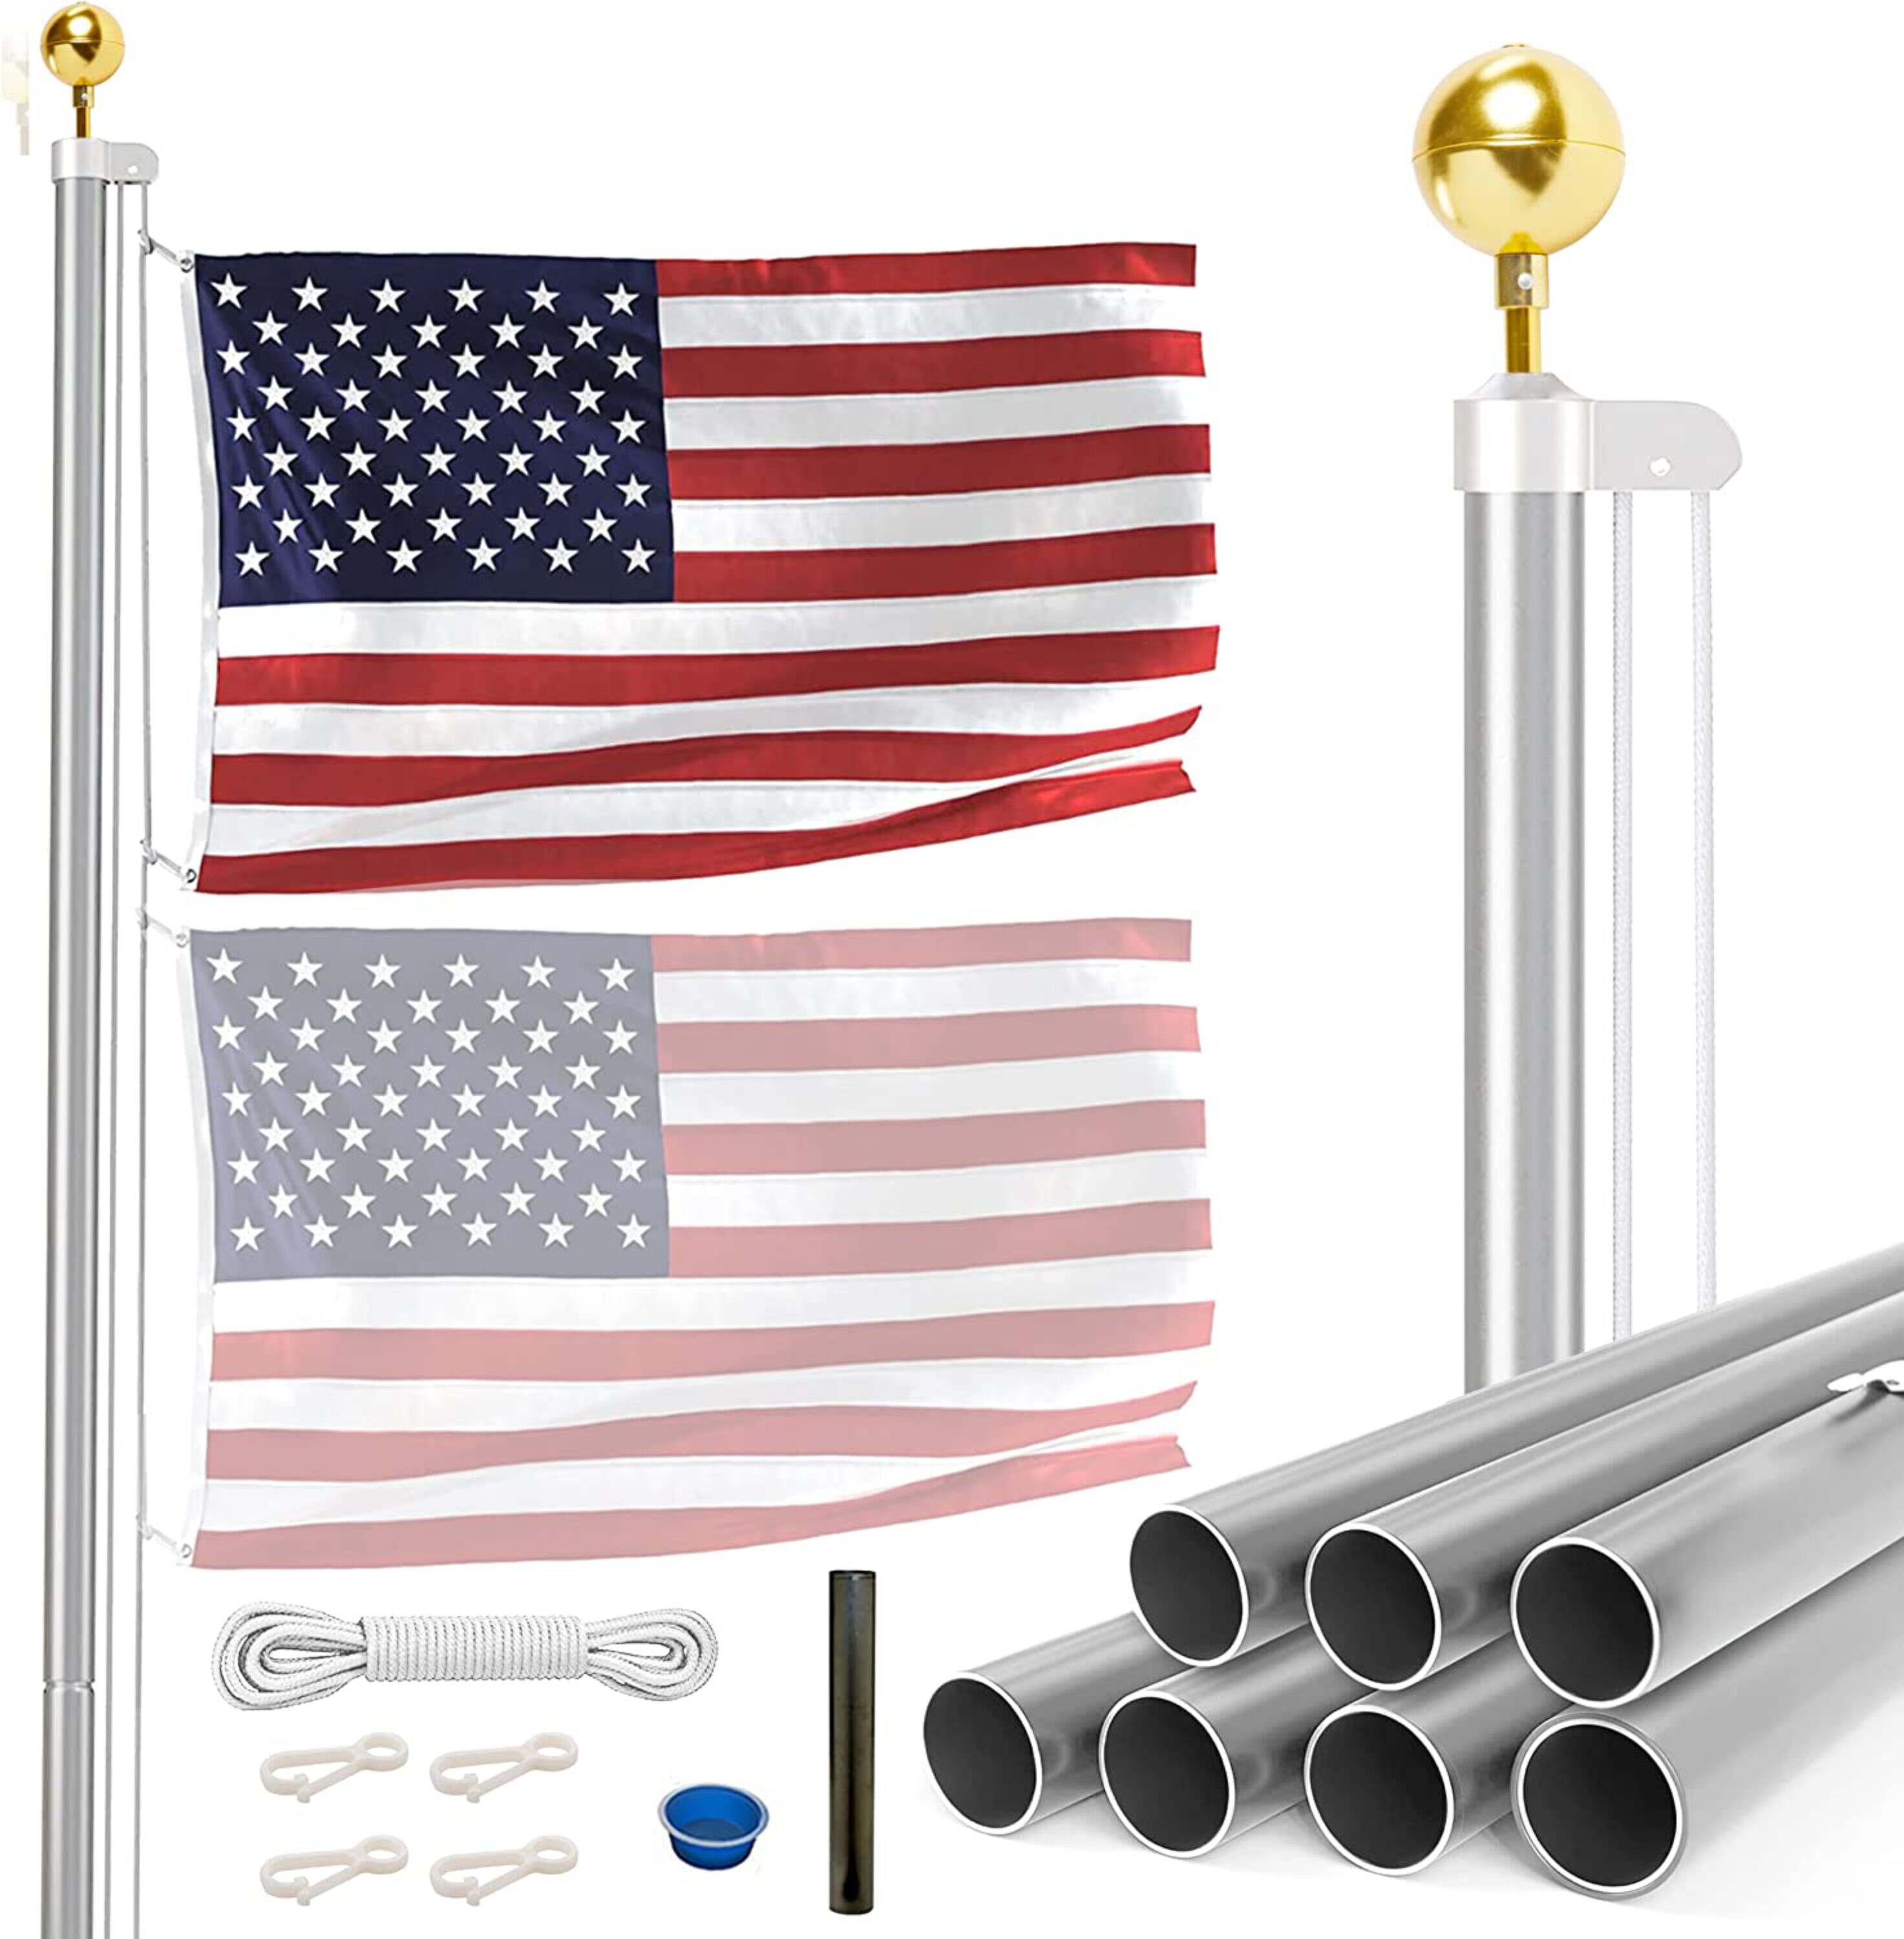 EZPOLE All American 8-ft W x 5-ft H American Flag in the